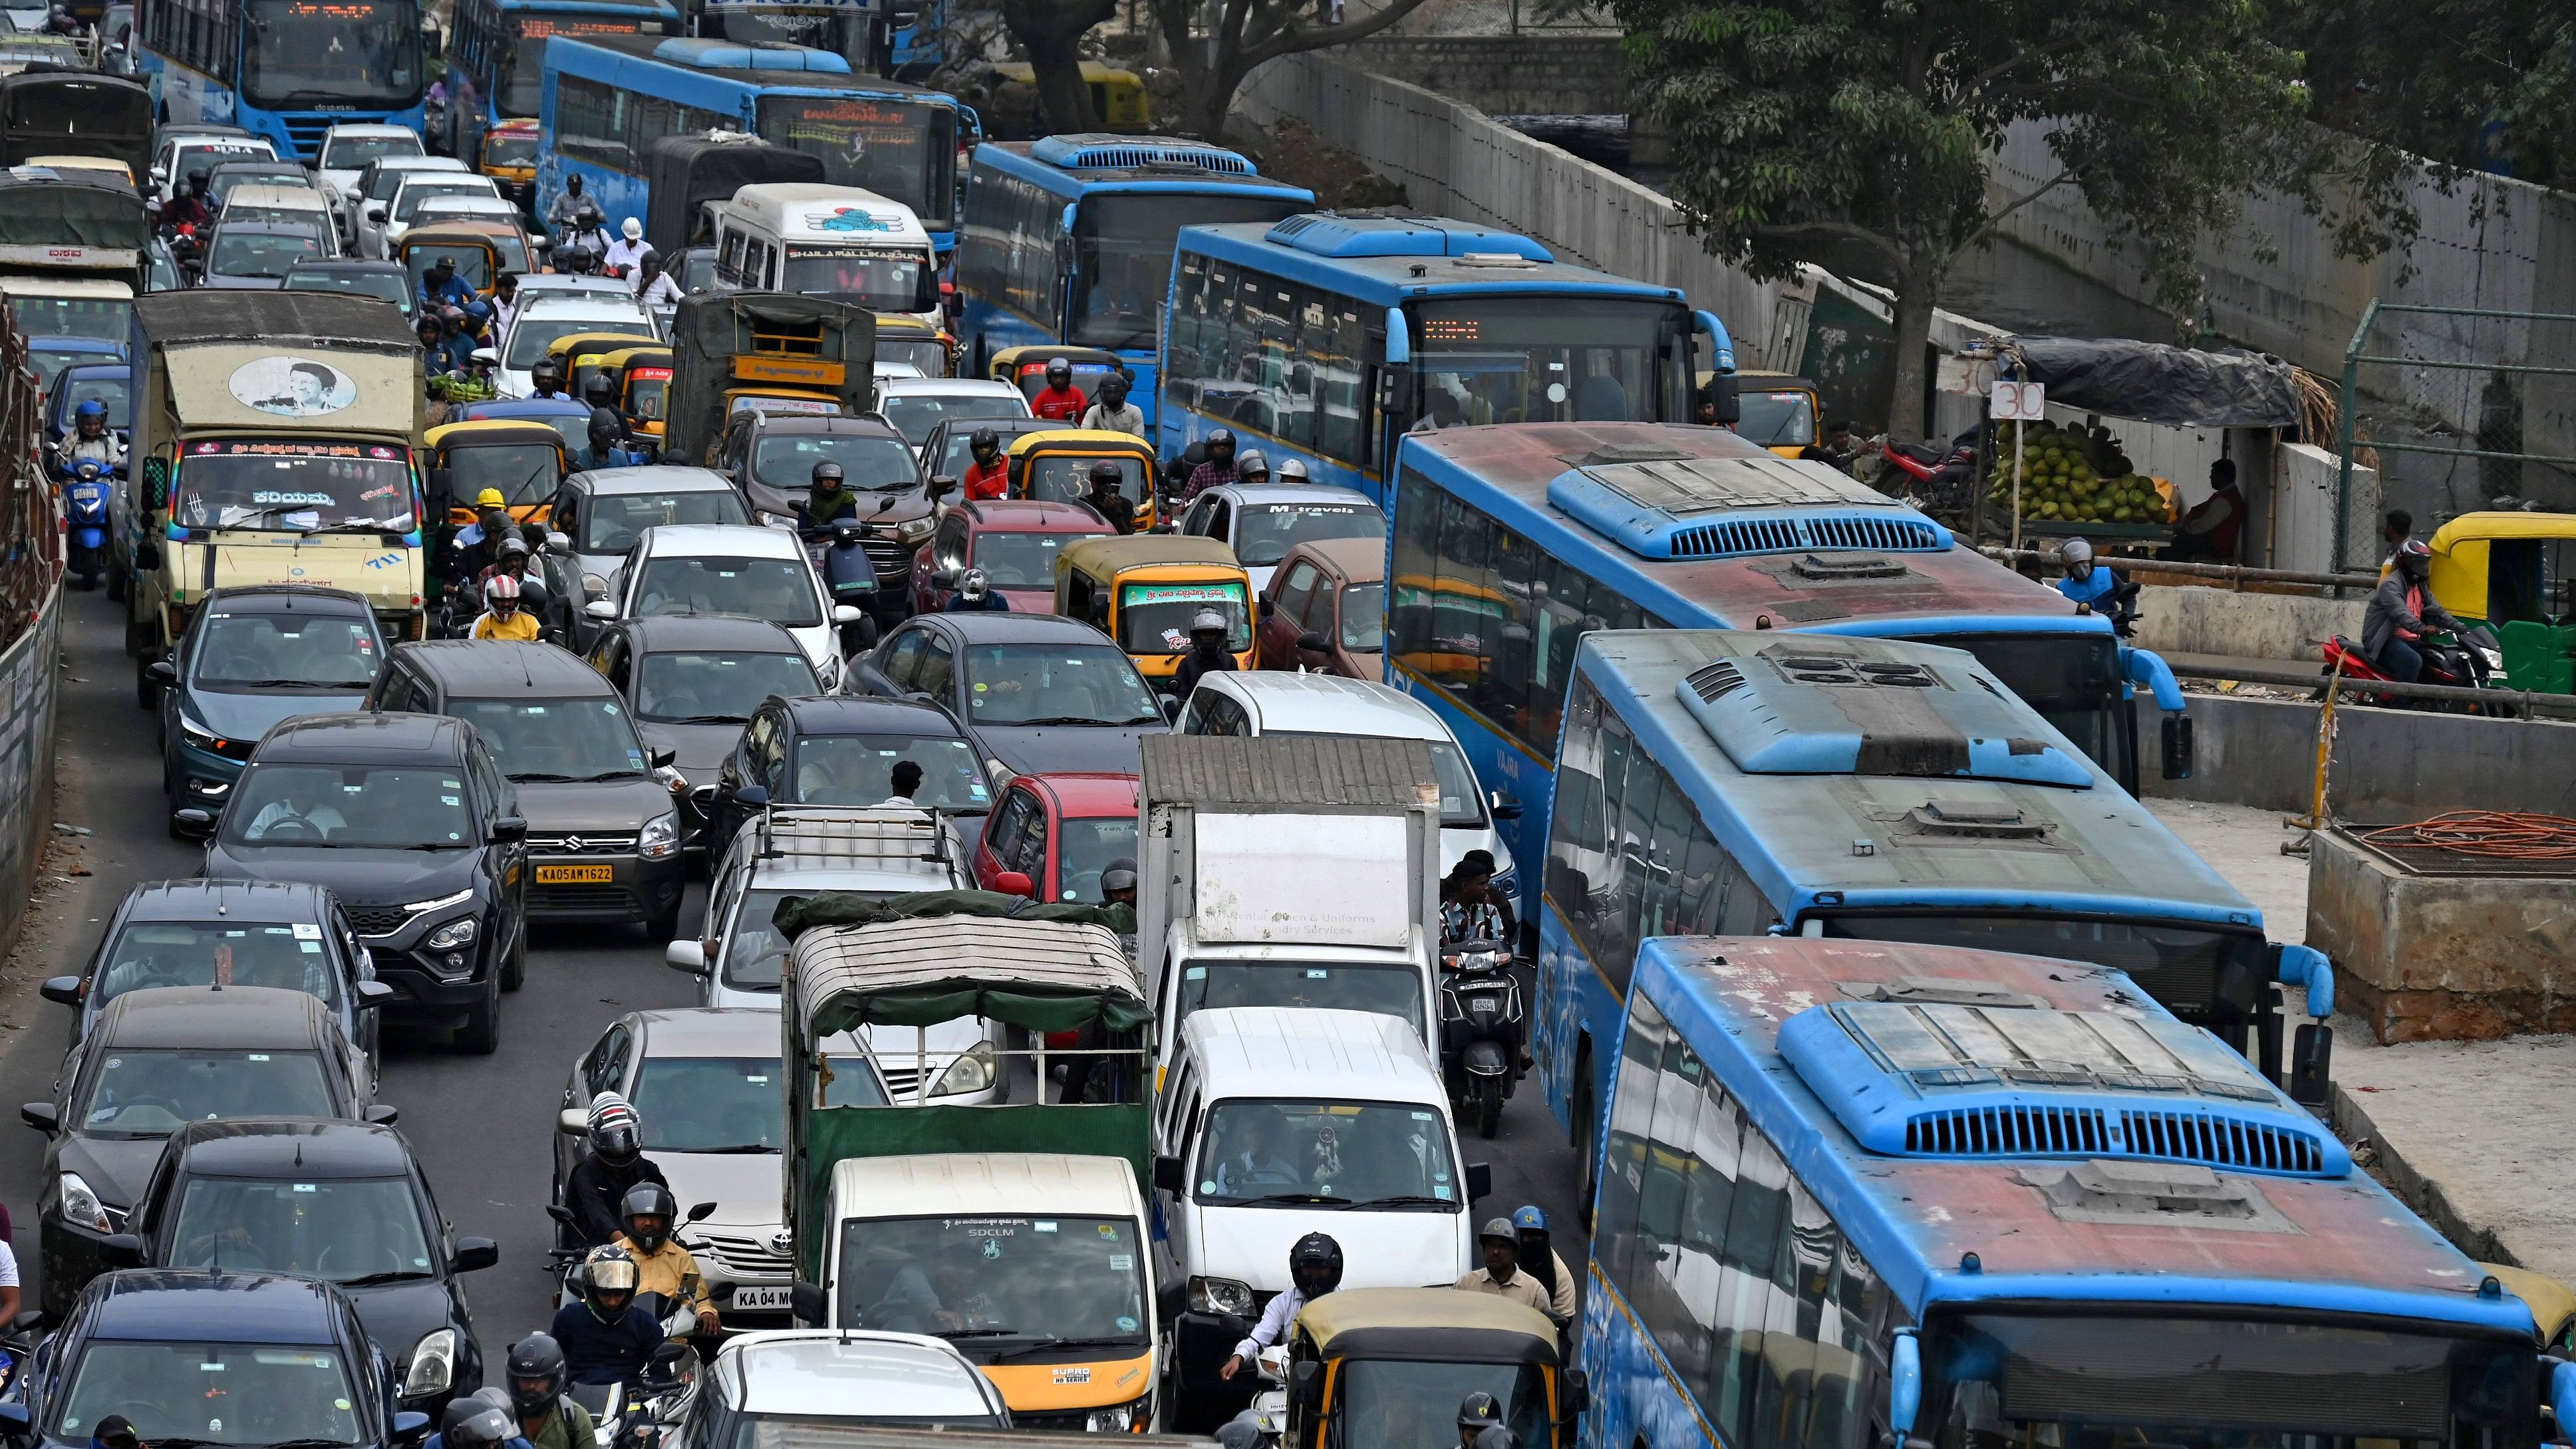 <div class="paragraphs"><p>Despite the huge number of vehicles, Bengaluru has proven to be less polluted than many other metropolitan cities. </p></div>